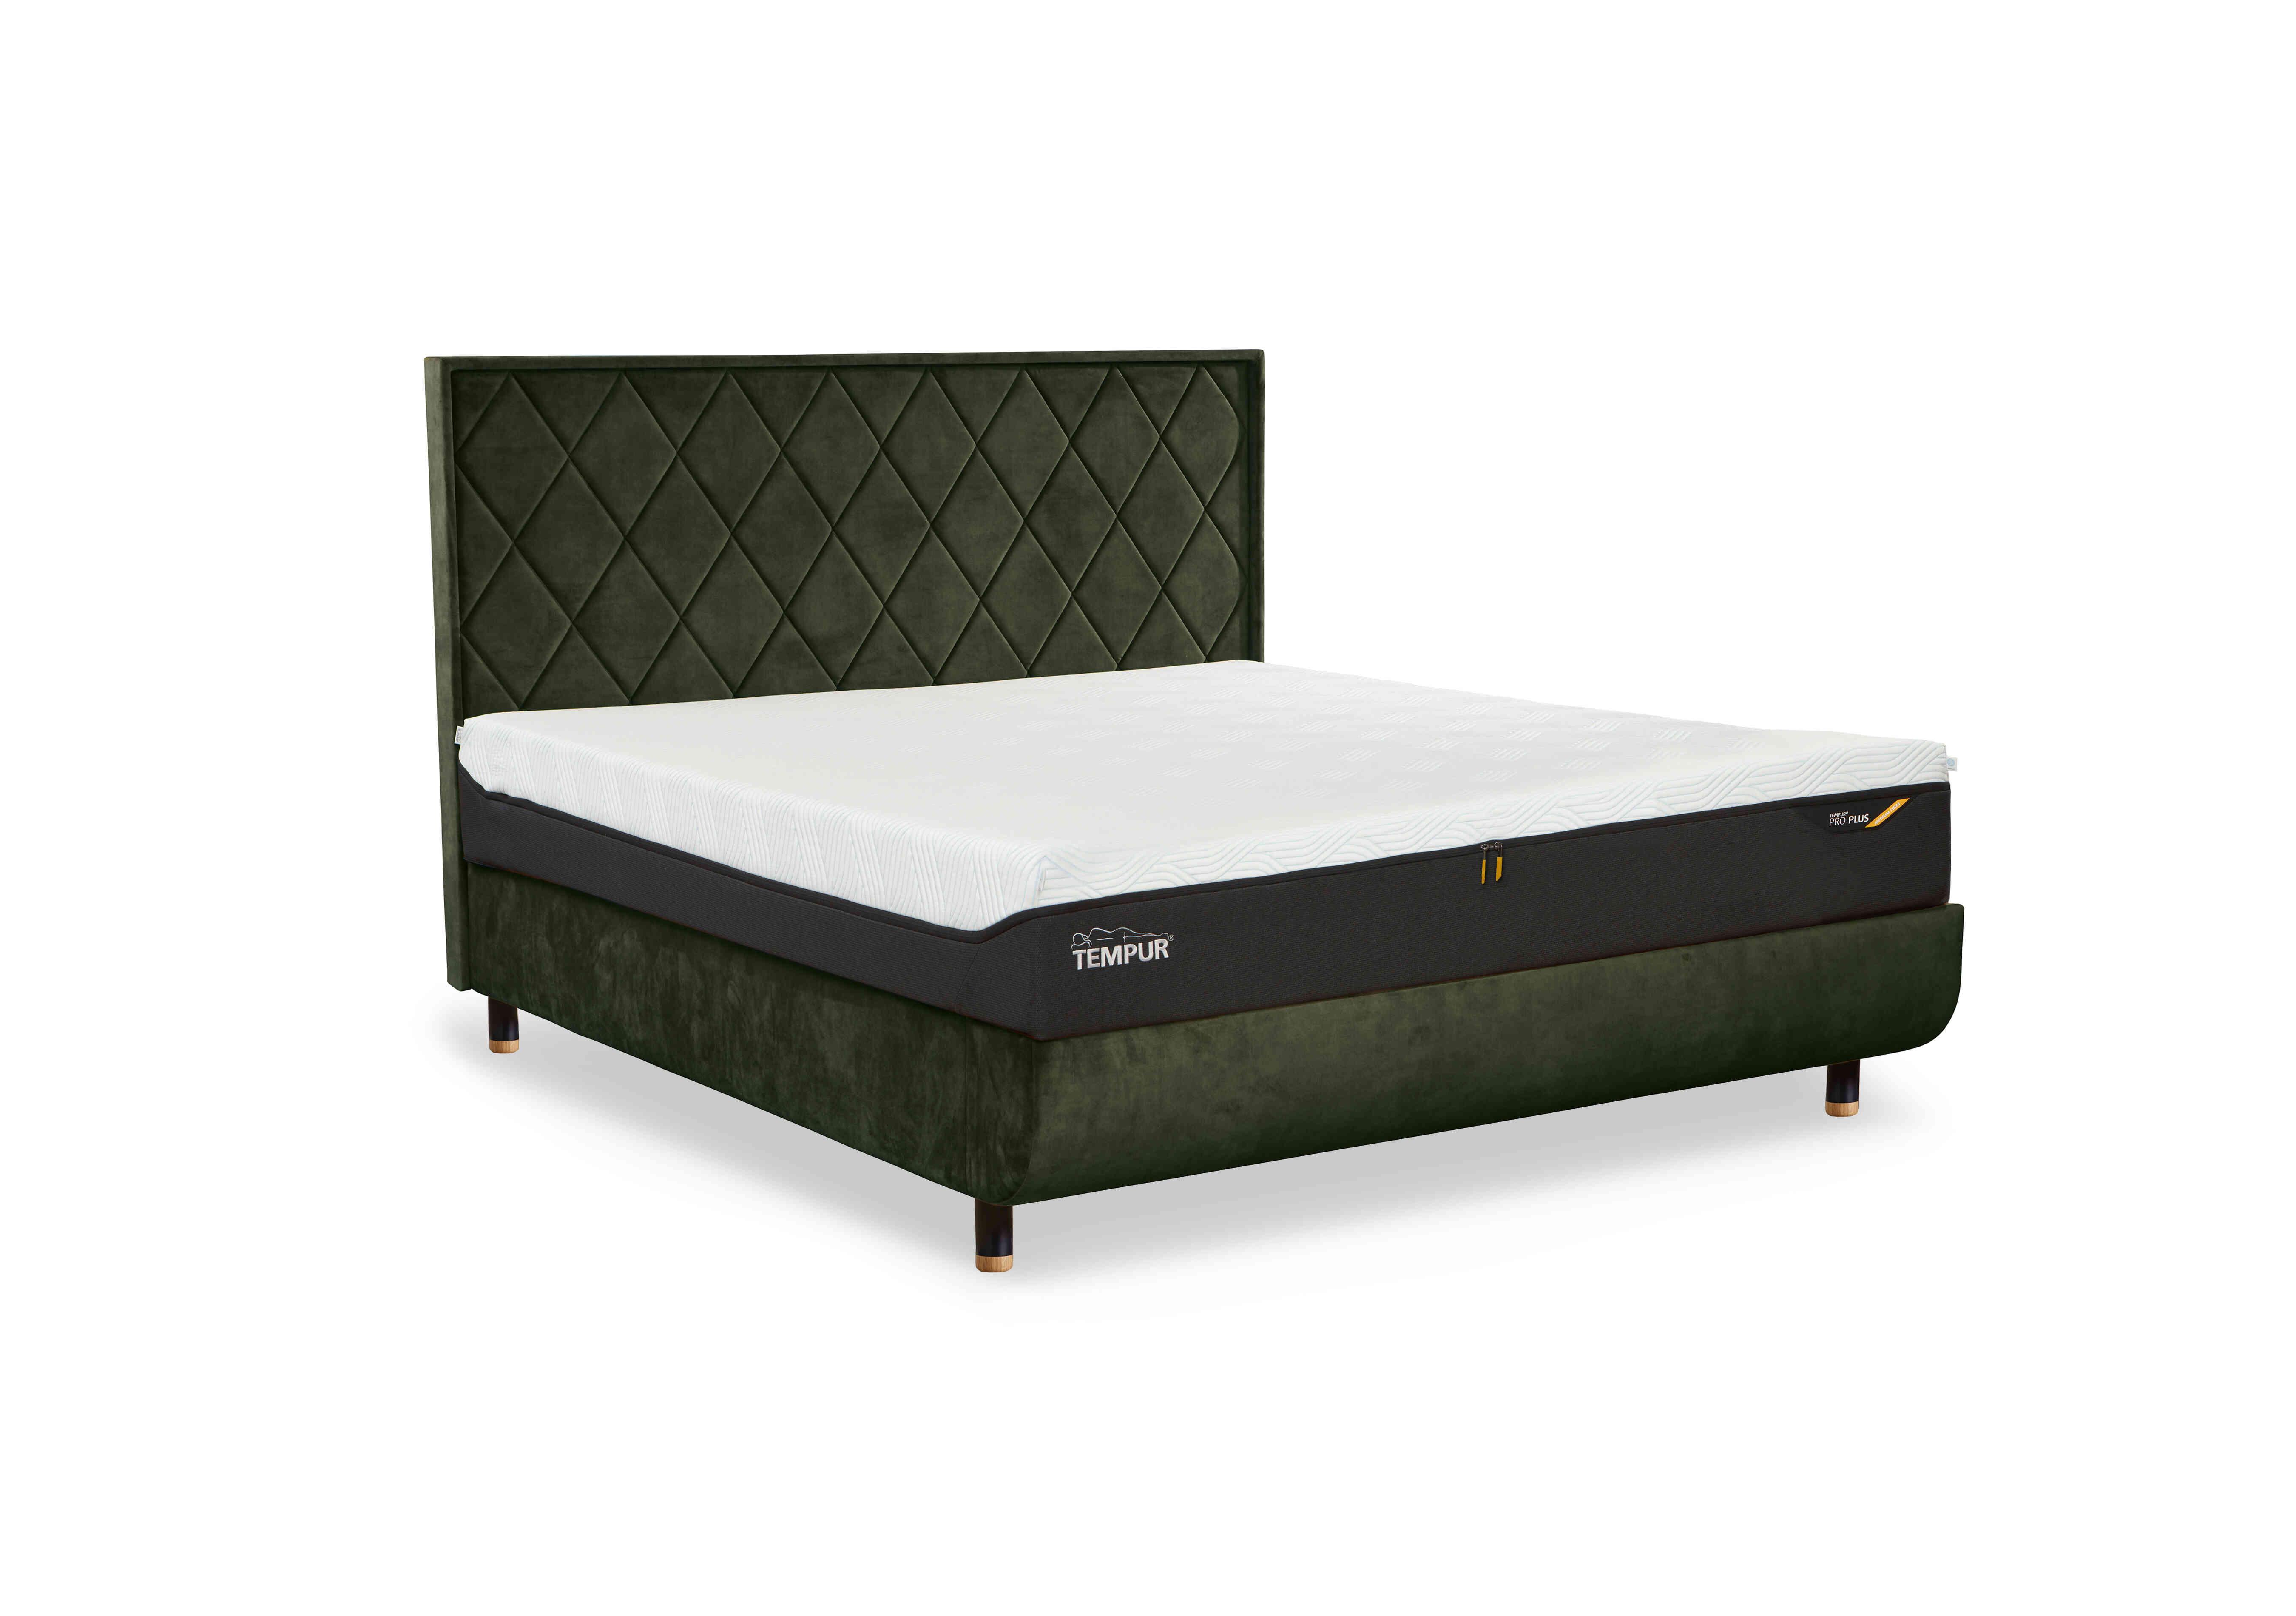 Arc Slatted Ottoman Bed Frame with Quilted Headboard in Dark Green-Black/Oak Feet on Furniture Village